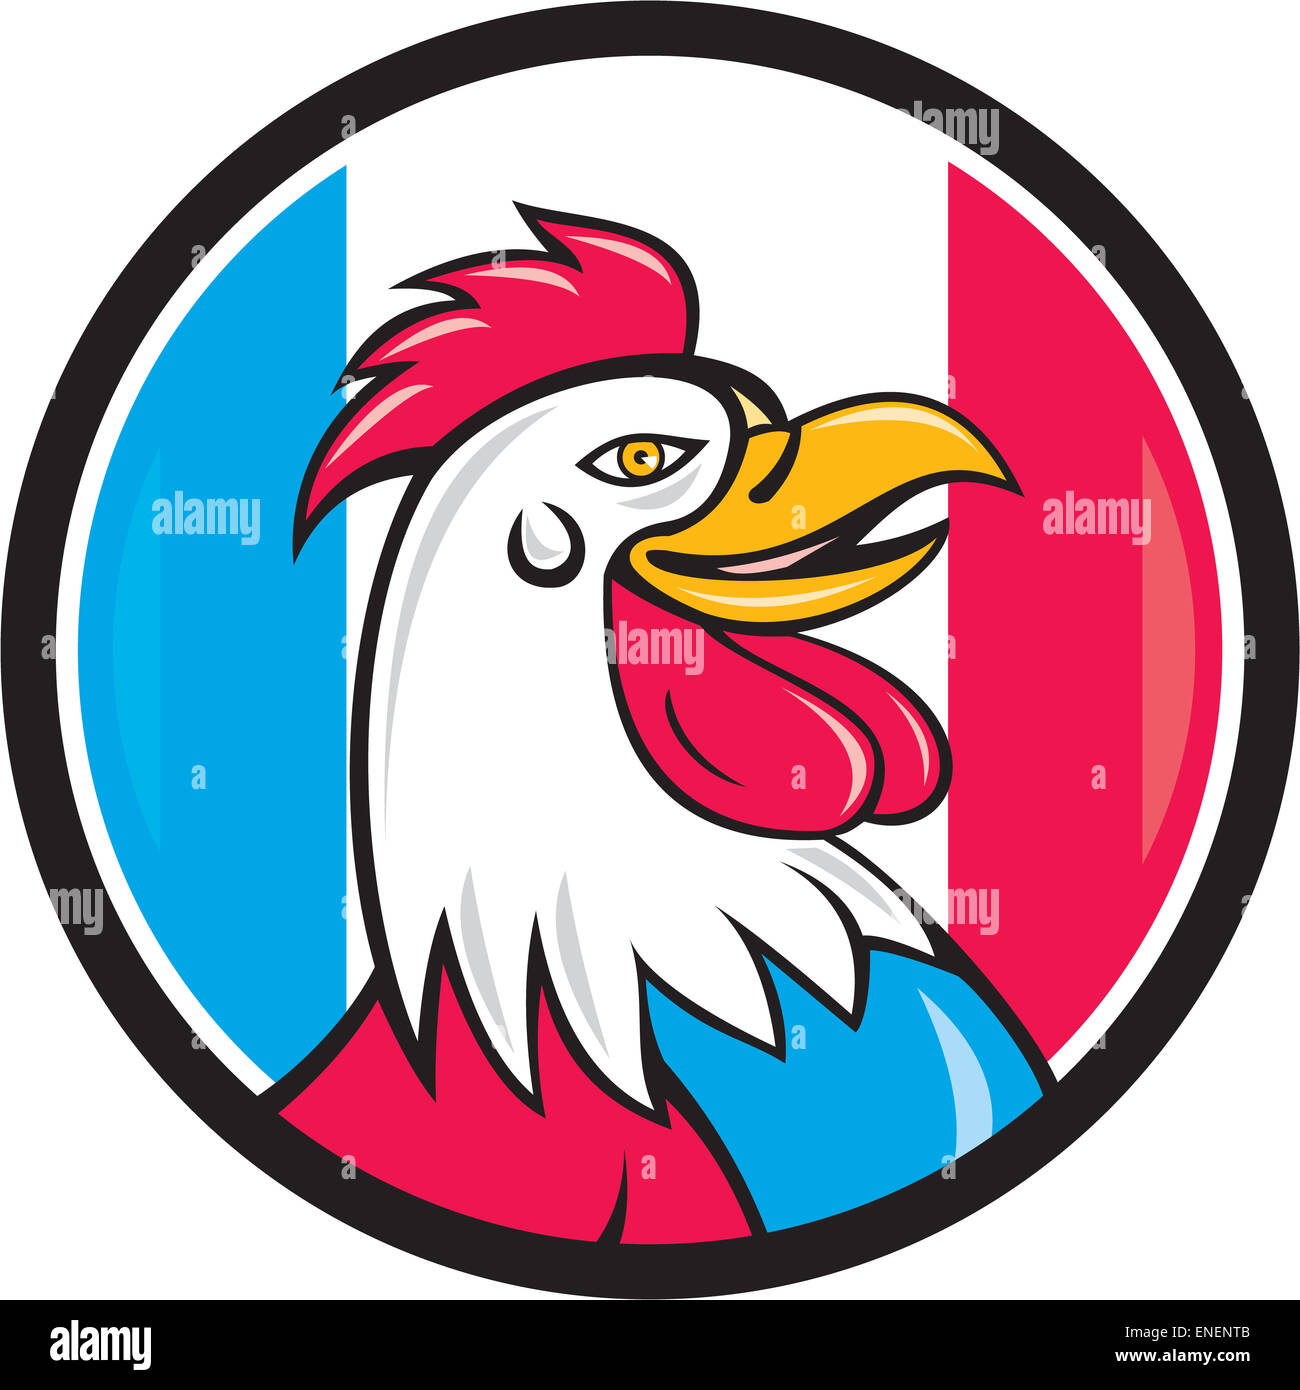 Cartoon style illustration of a french rooster chicken head smiling viewed from the side set inside circle with france flag stripes in the background. Stock Photo